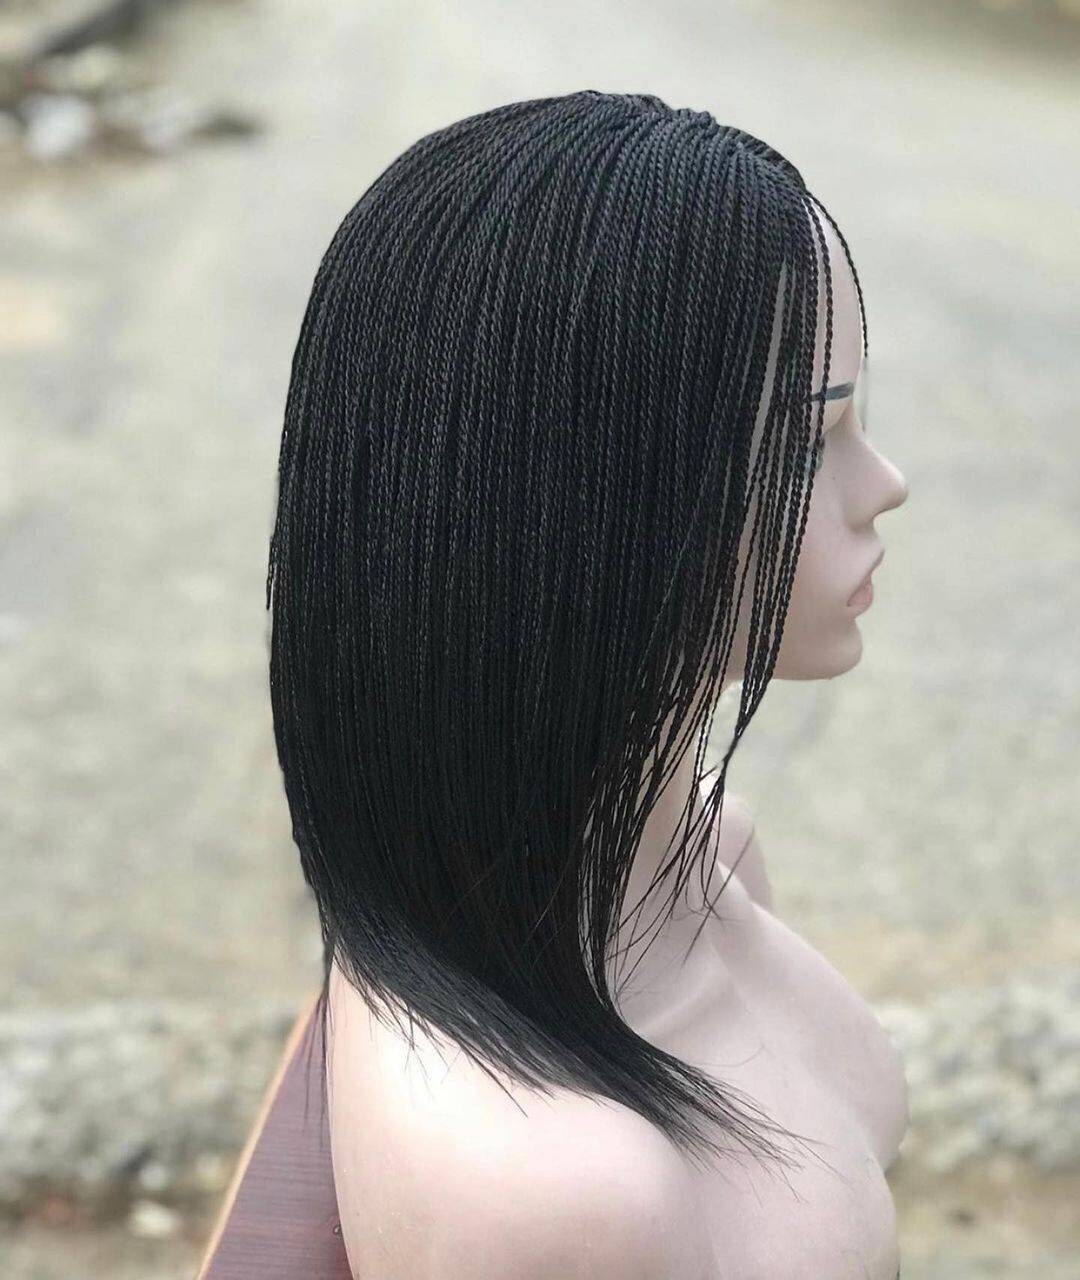 Short micro braid wig, braided wig, lace front wig, full lace wig, frontal wig, braid wig, braided lace wigs, micro braids full lace wig